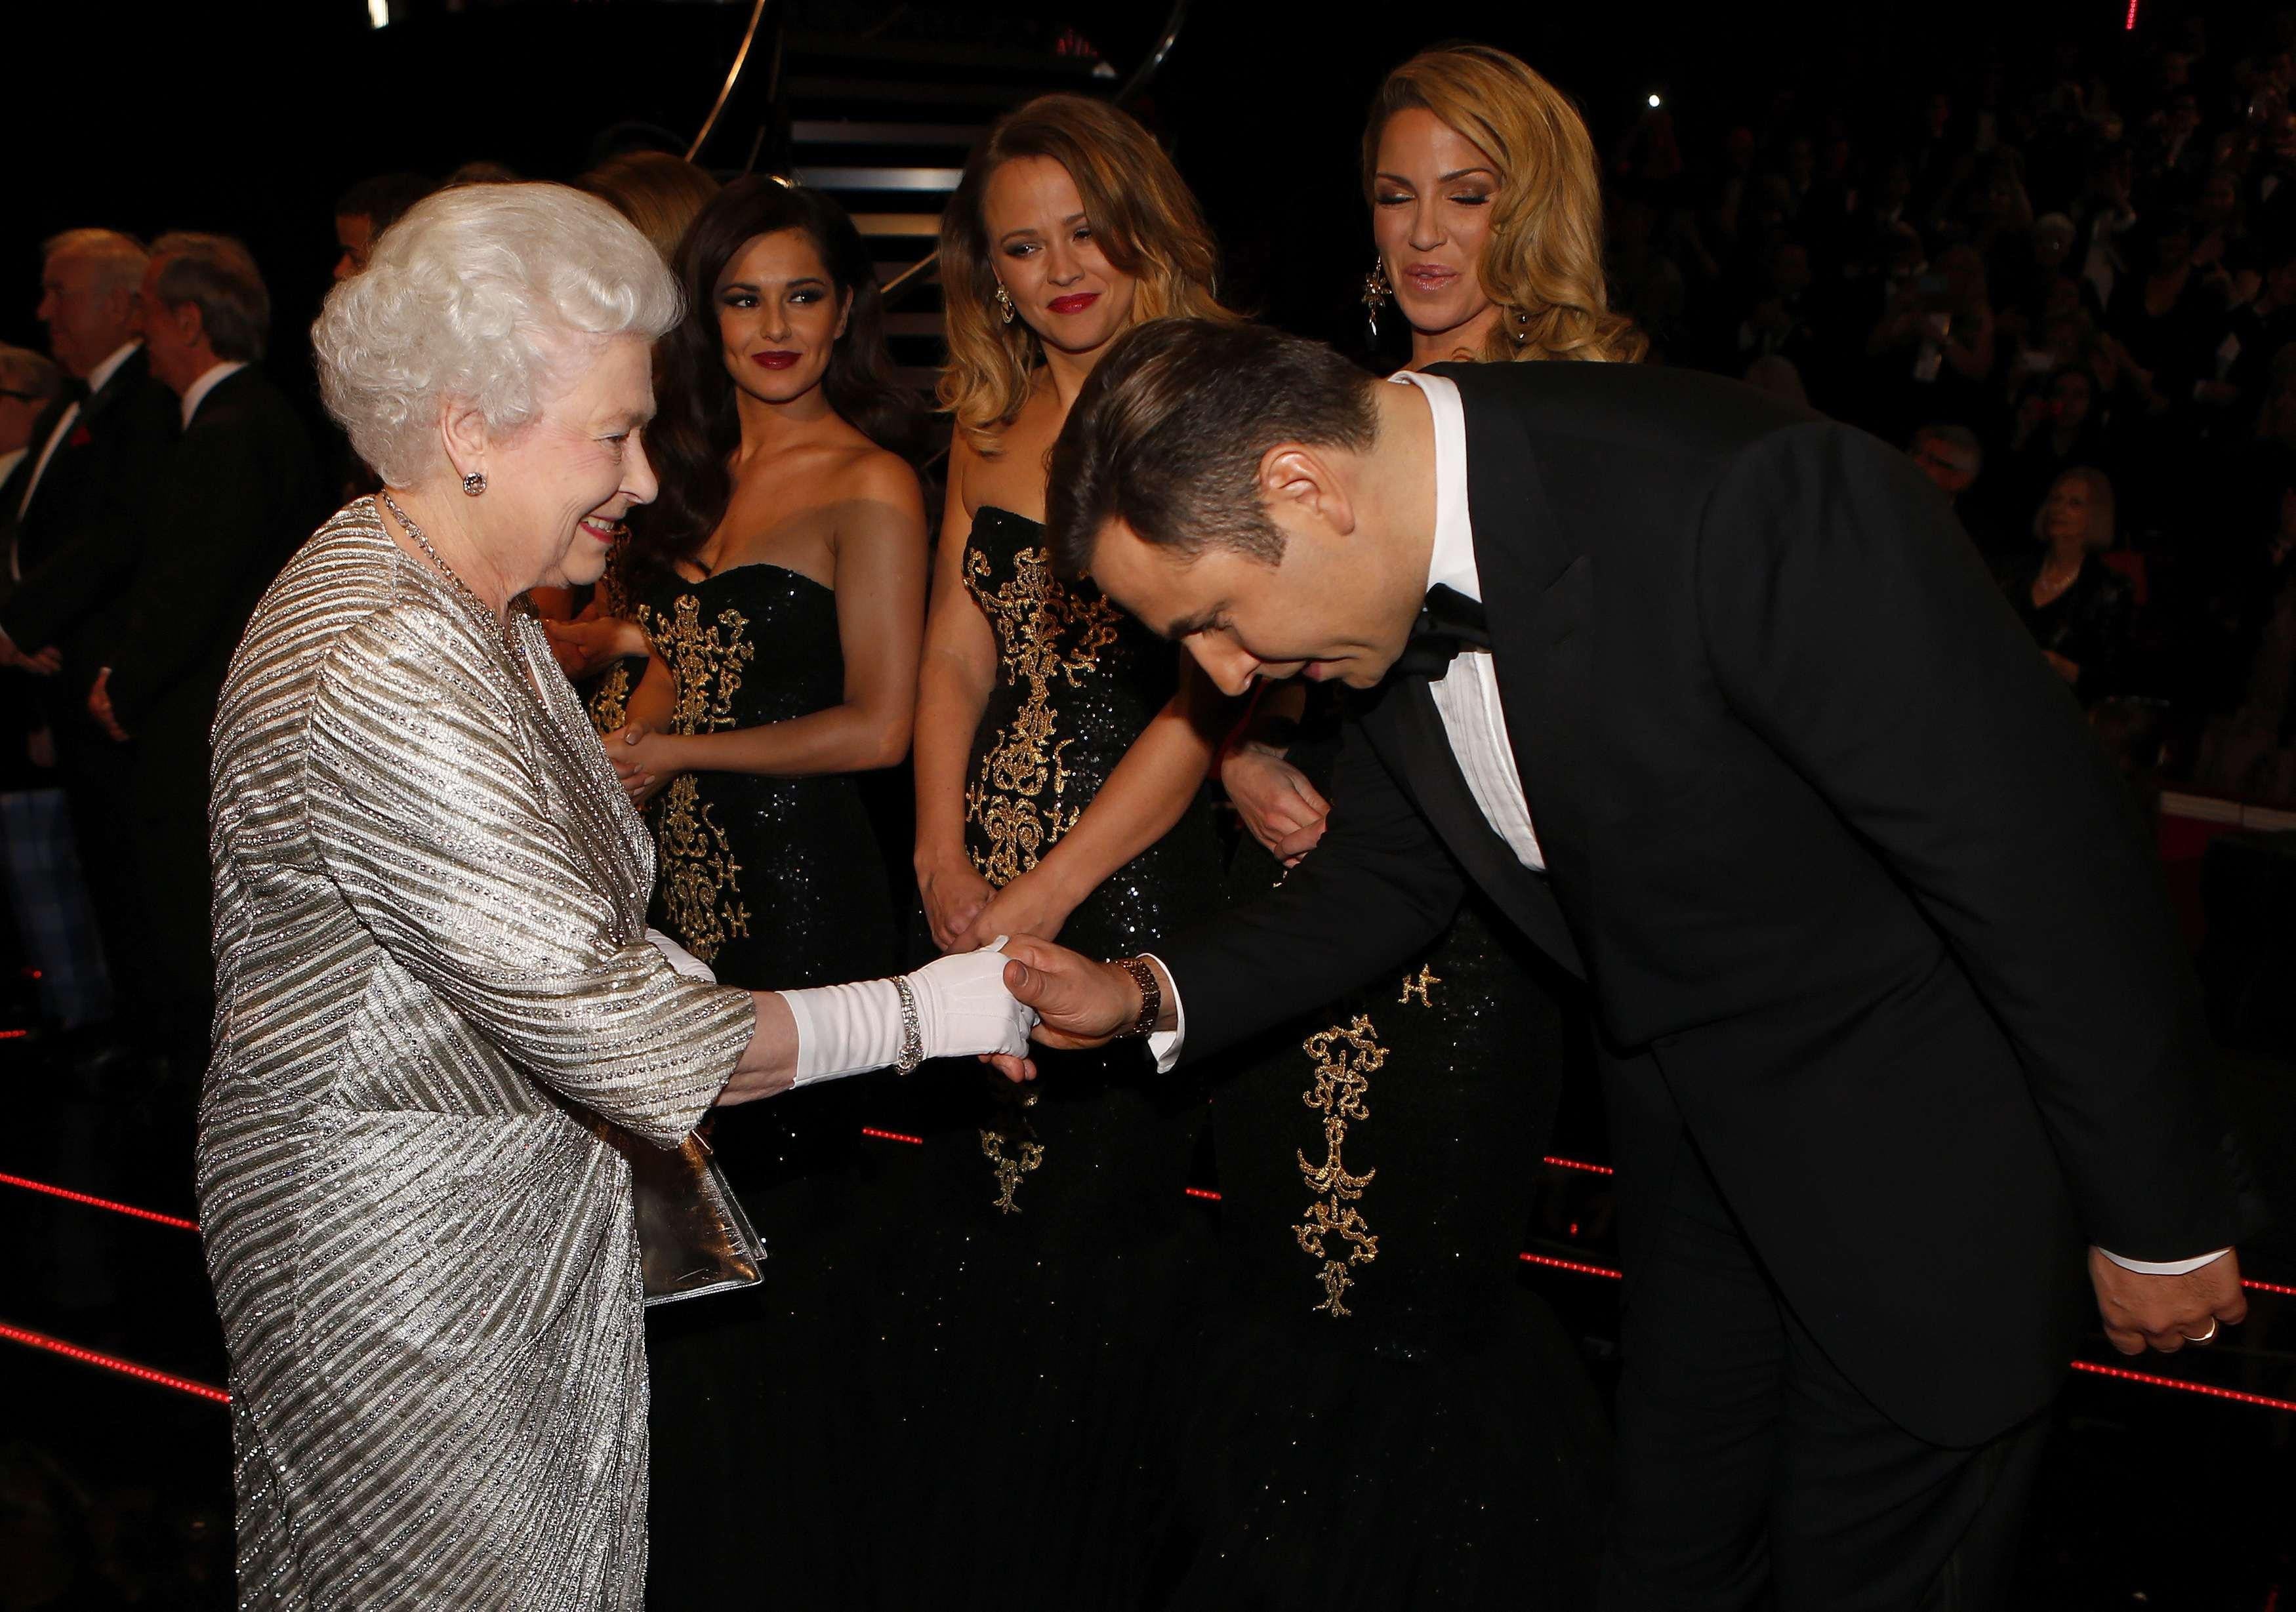 Queen Elizabeth II greets comedian David Walliams after the Royal Variety Performance at the Royal Albert Hall in London (PA)